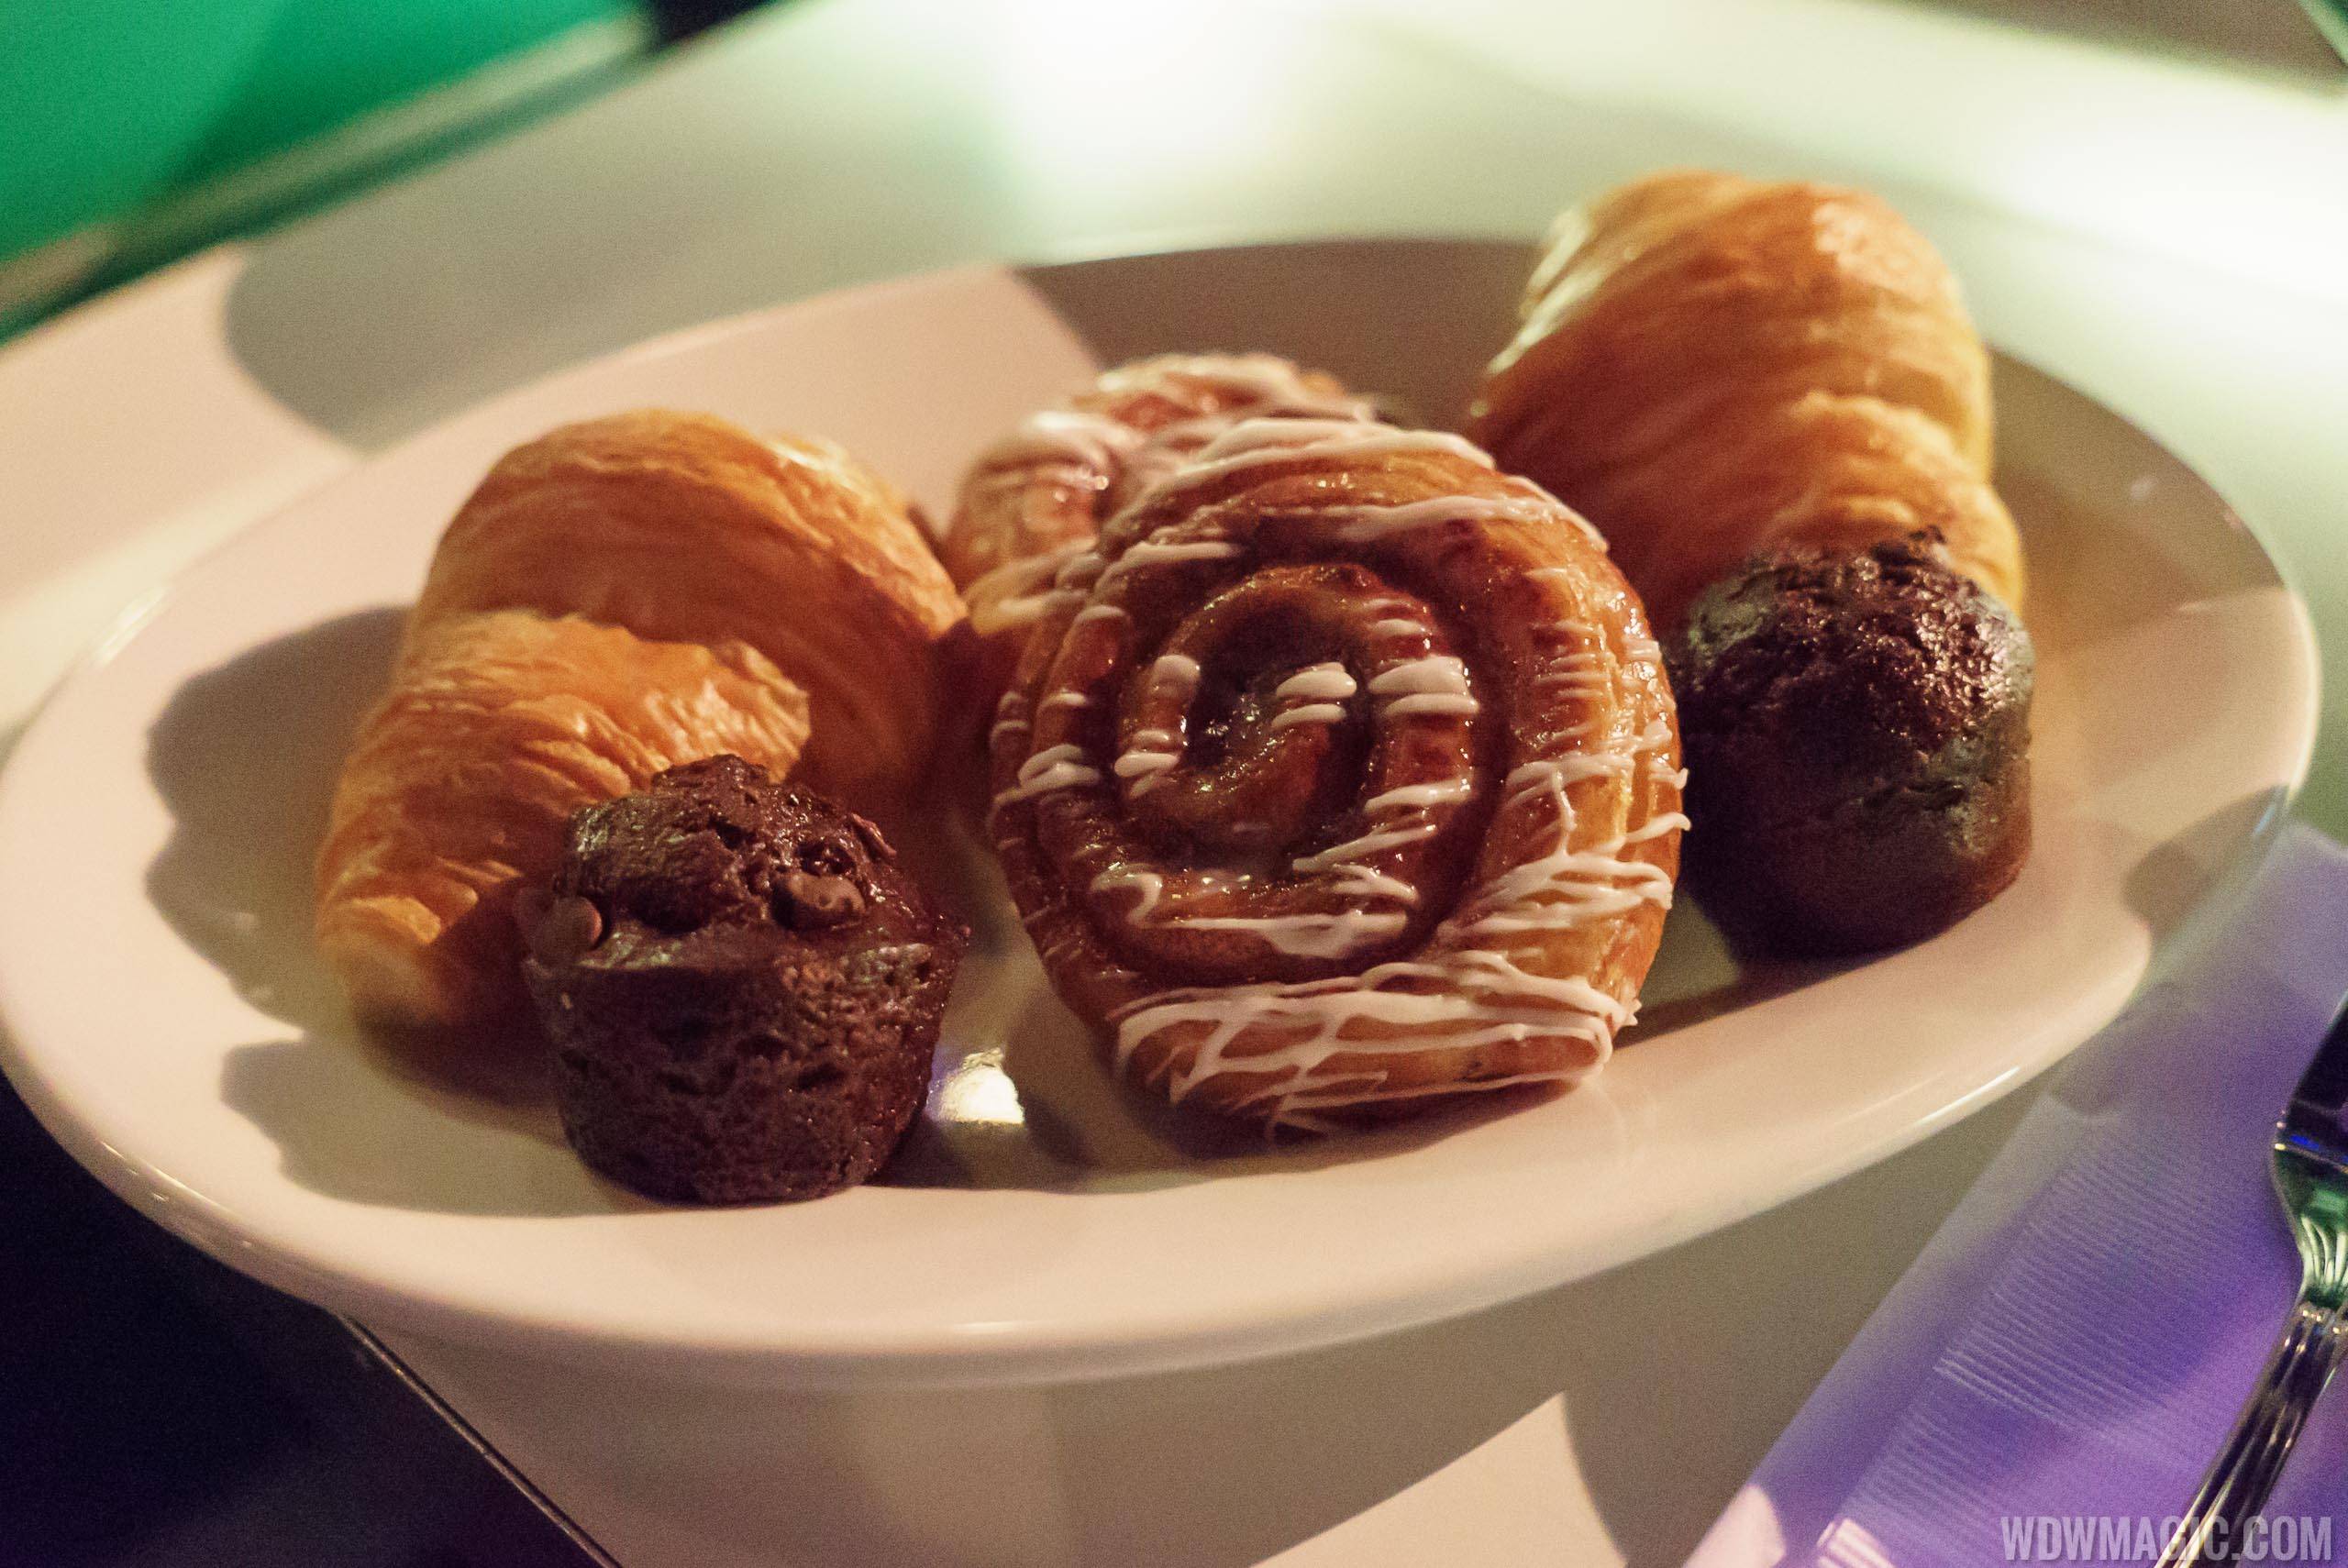 Sci-Fi Dine-In breakfast - Pastry basket with Croissant, Double Chocolate Muffin, and Orange-glazed Cinnamon Bun